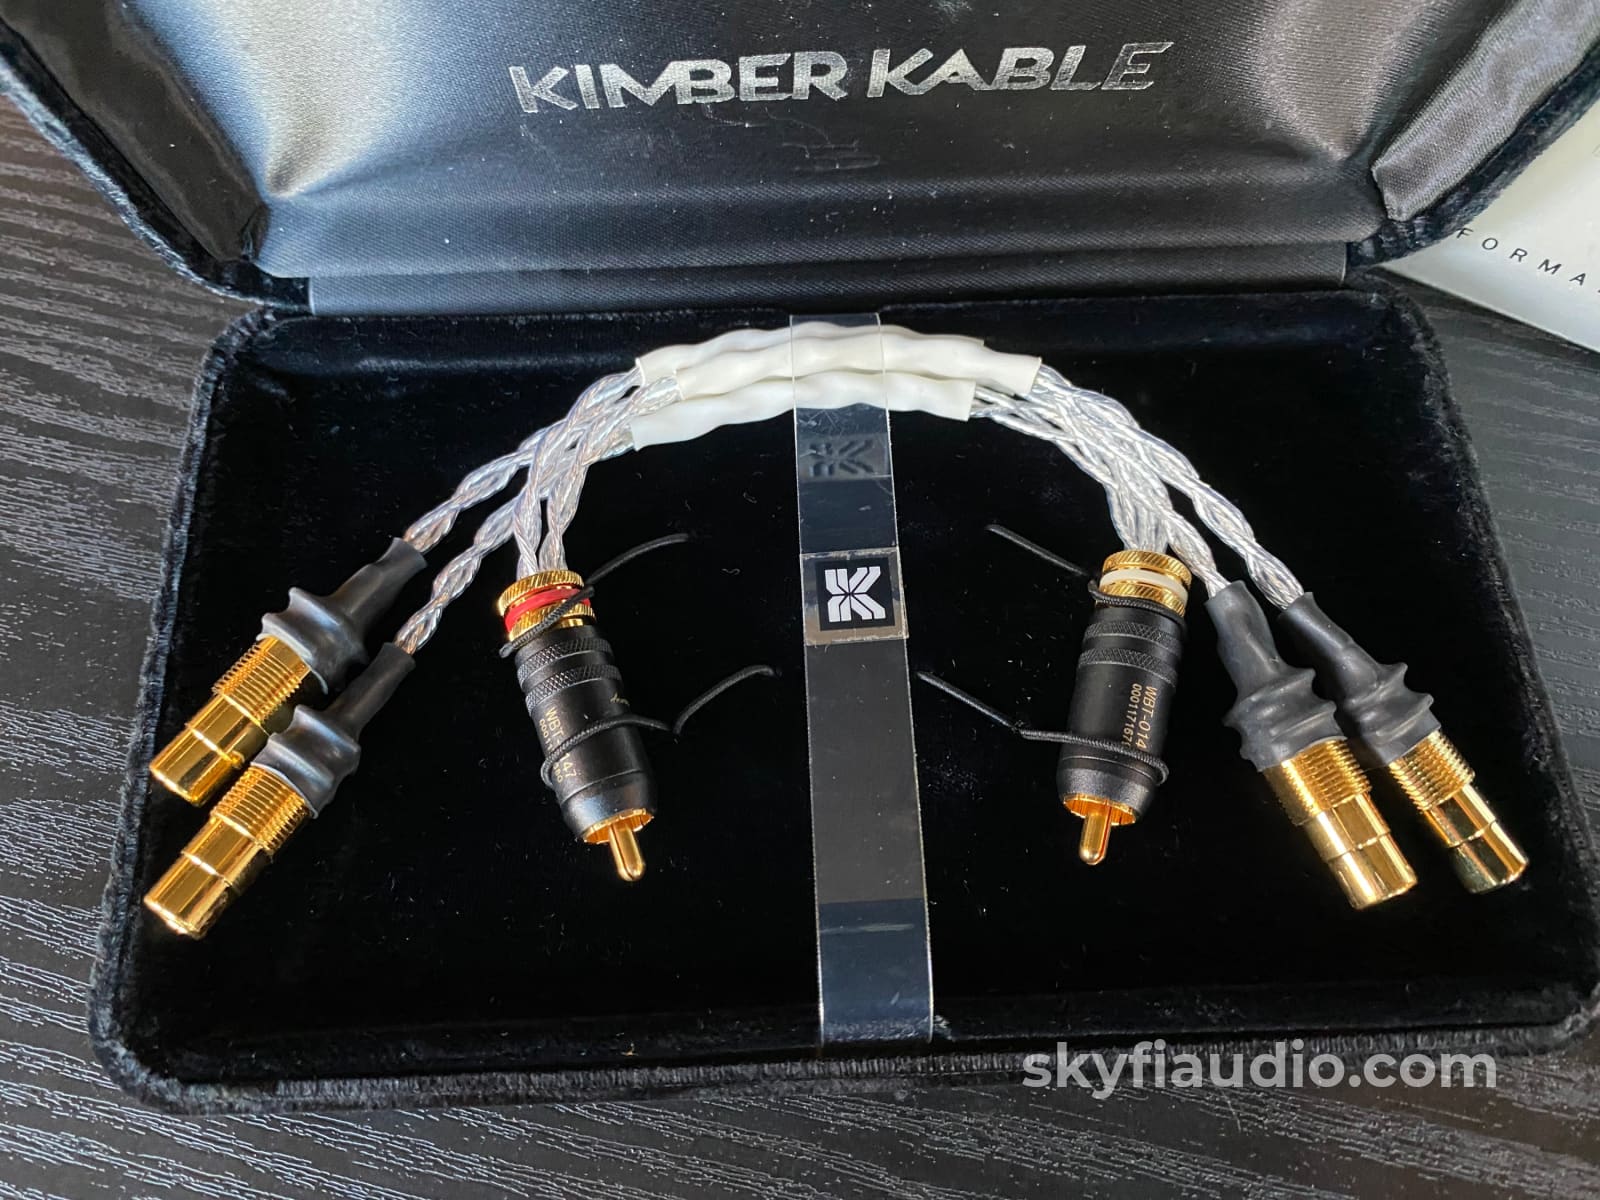 Kimber Kable Kcag Rca Analog Audio Y Cord Interconnects (Pair) 6’ Cables